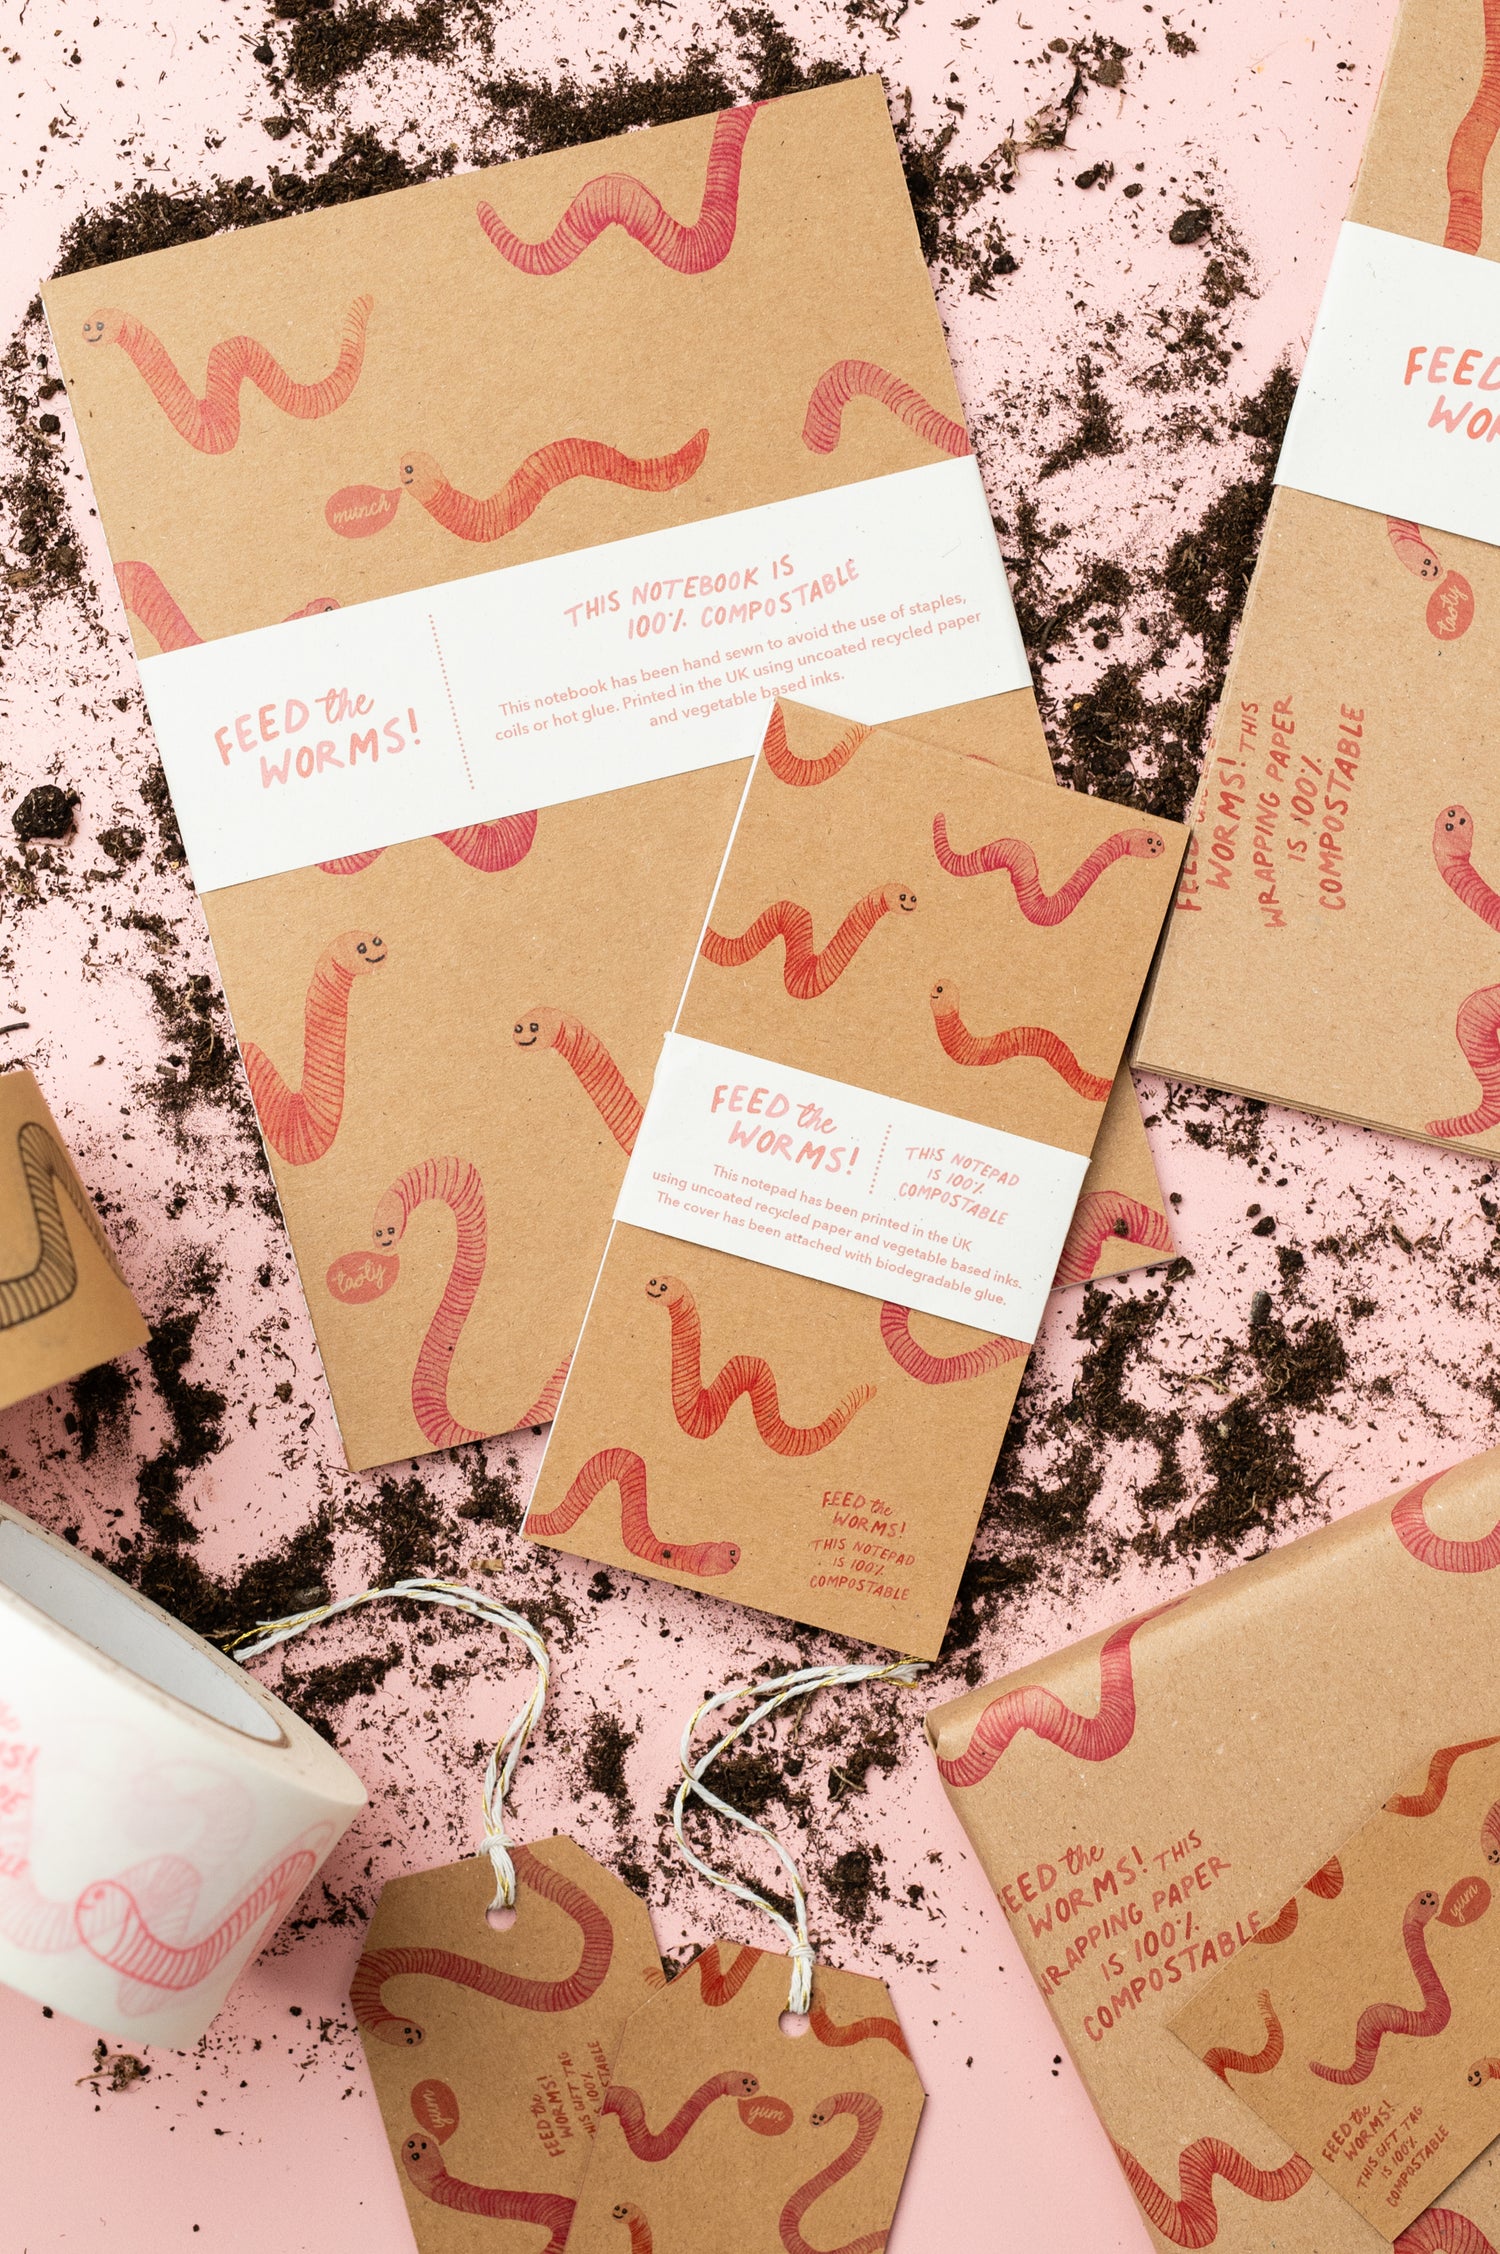 Ruby &amp; Bo Feed The Worms 100% Compostable Stationery collection on a pink background